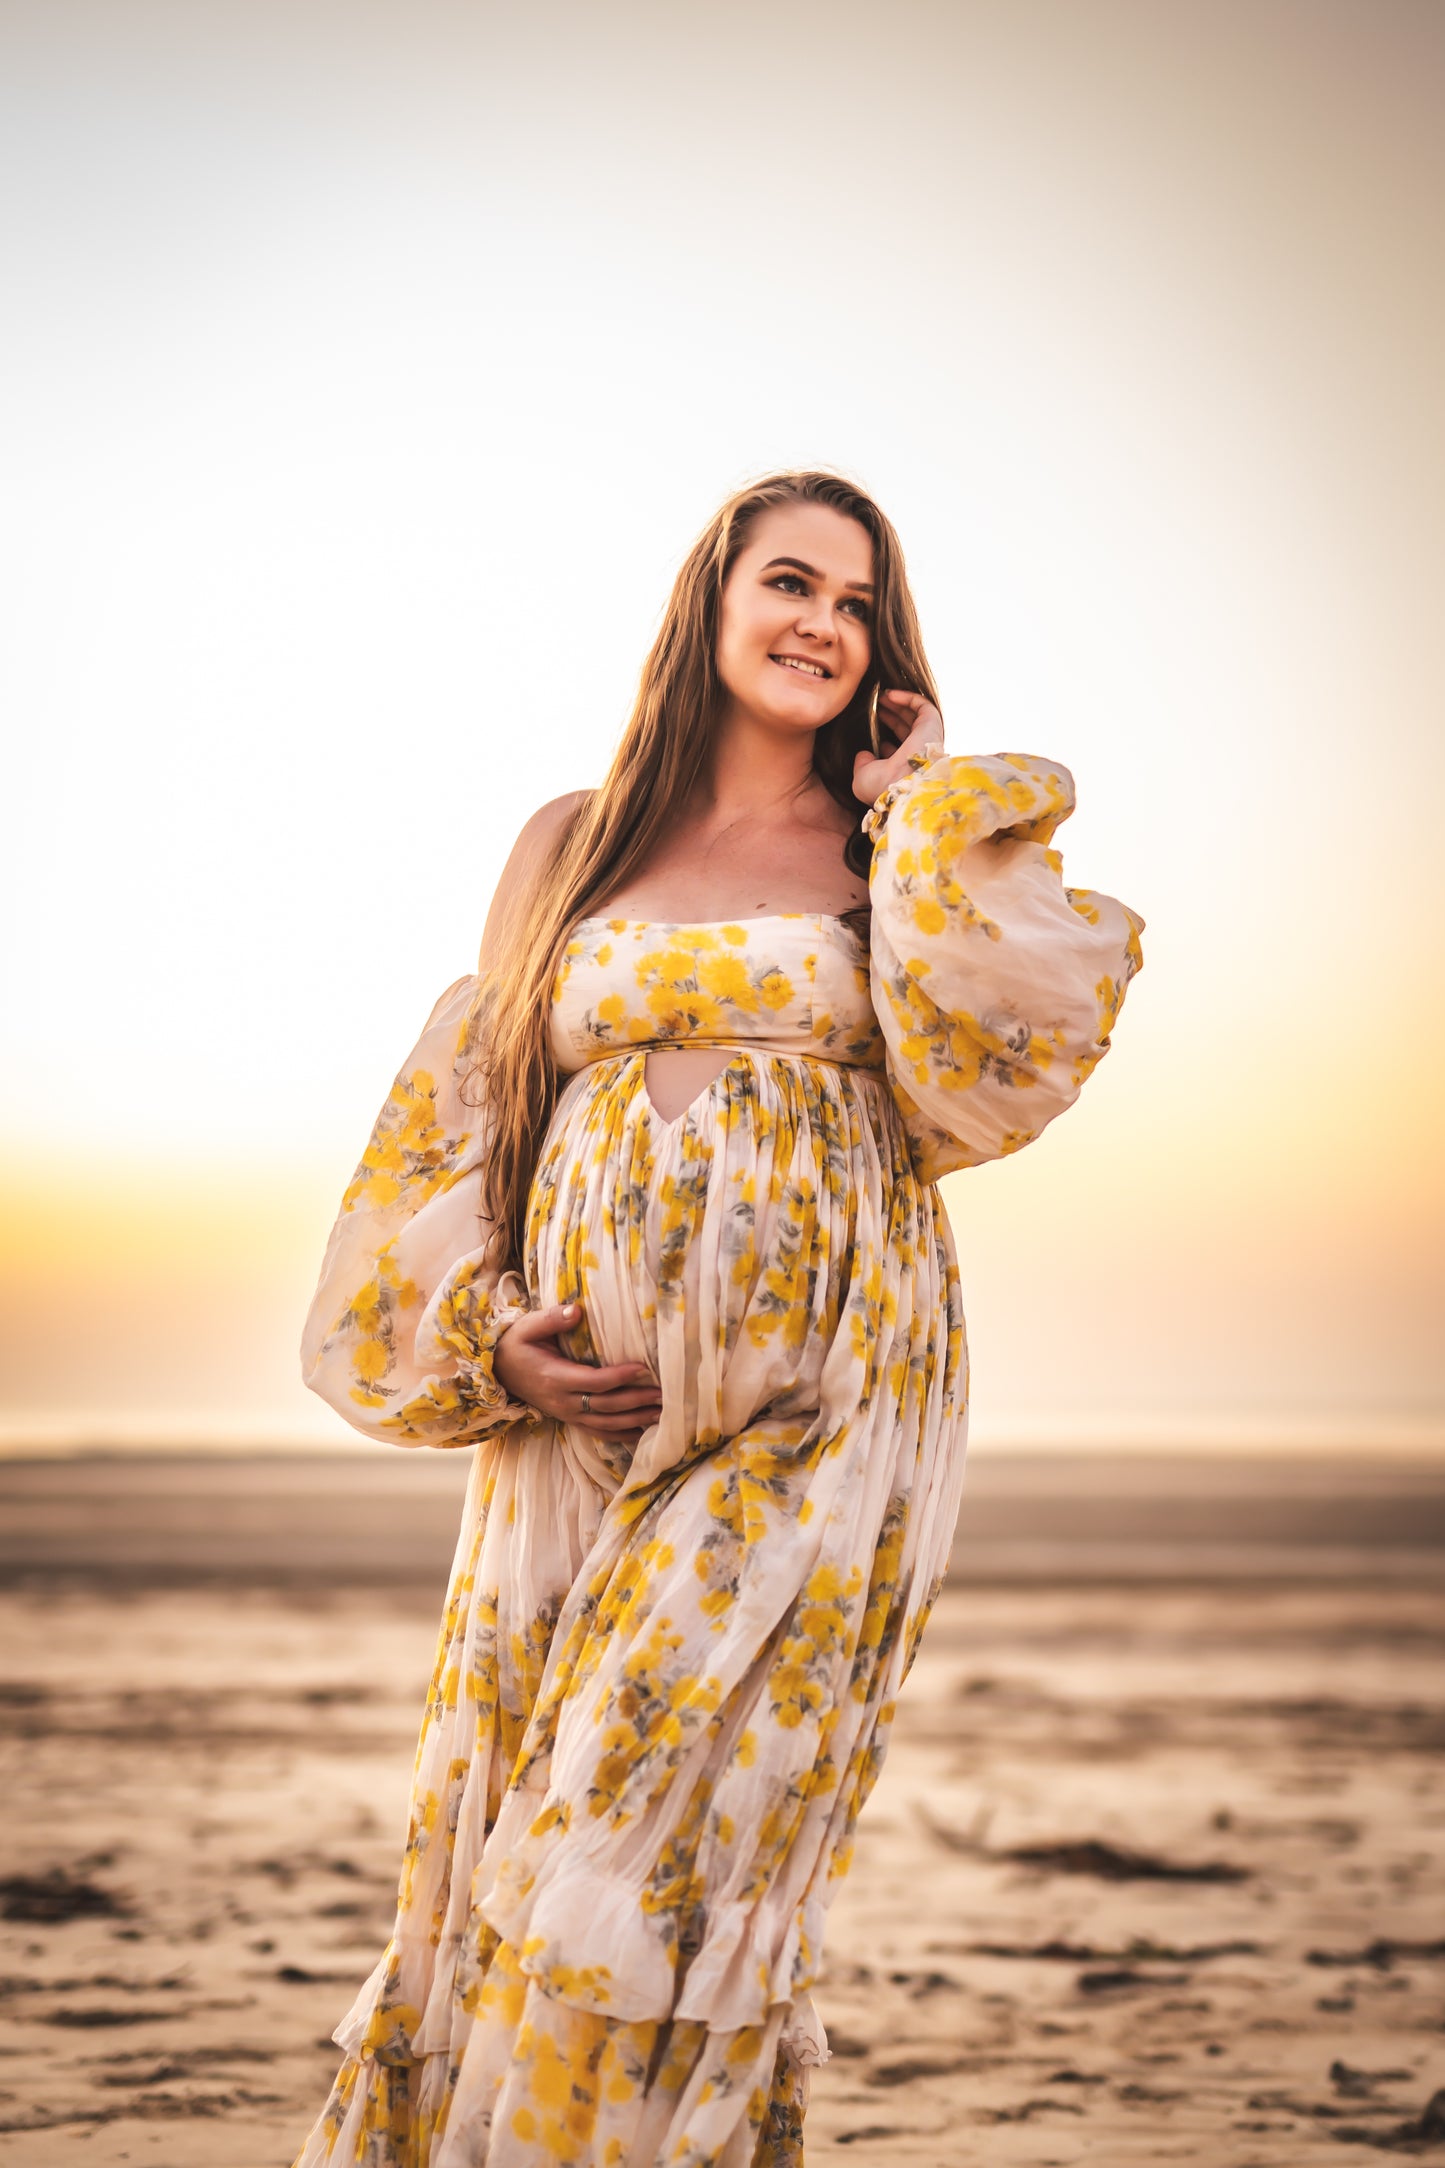 Dress Hire - Maternity Photoshoot Dresses - Rooh Collective - Poppy Zephyr - DAY RENTAL